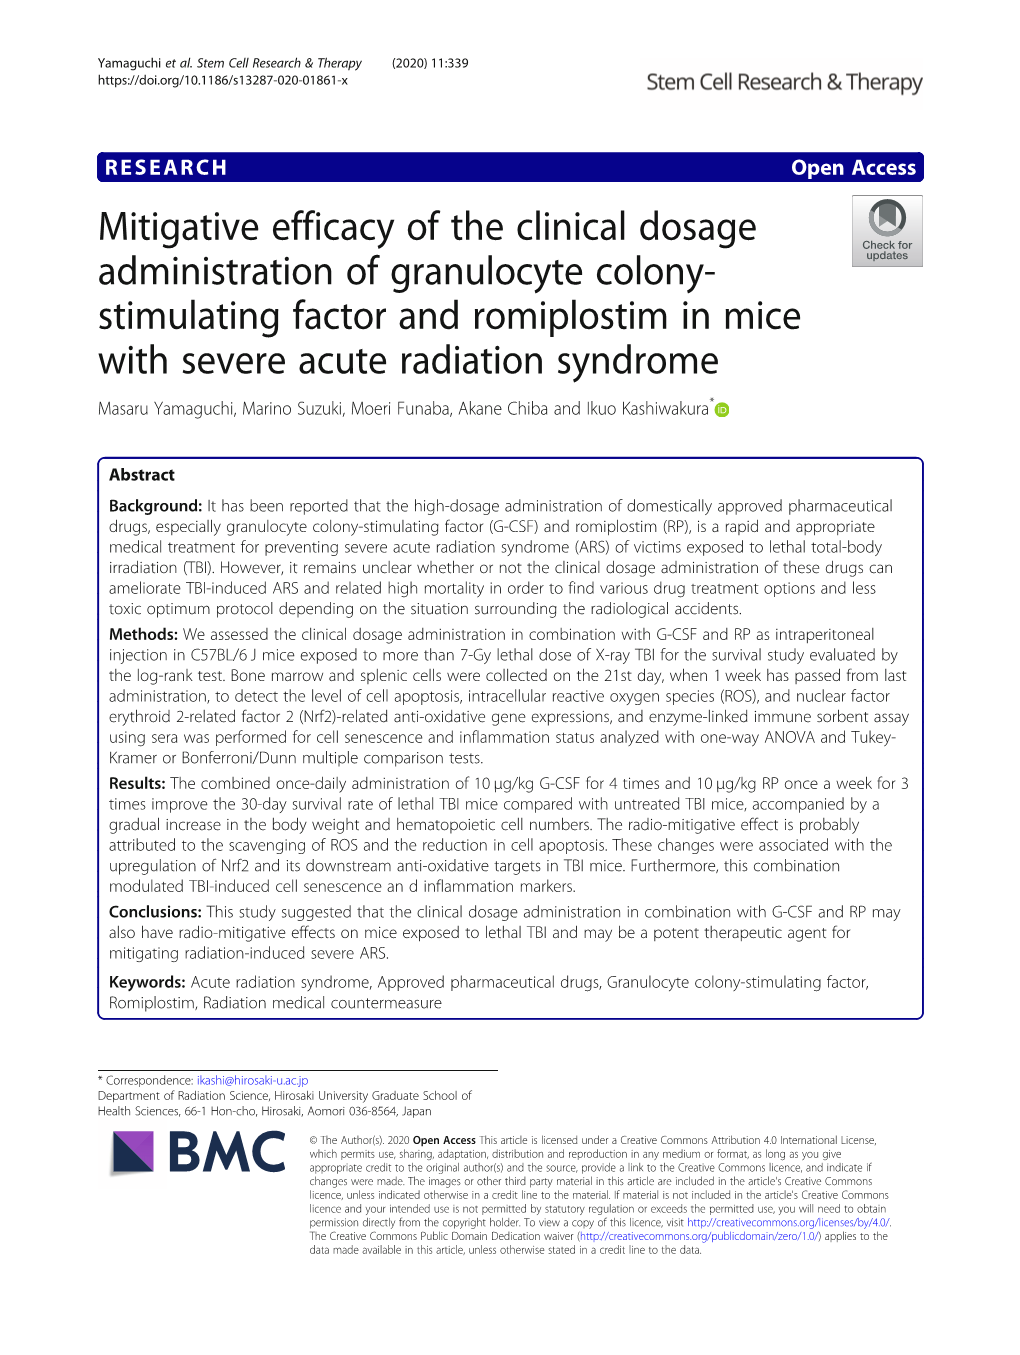 Mitigative Efficacy of the Clinical Dosage Administration Of